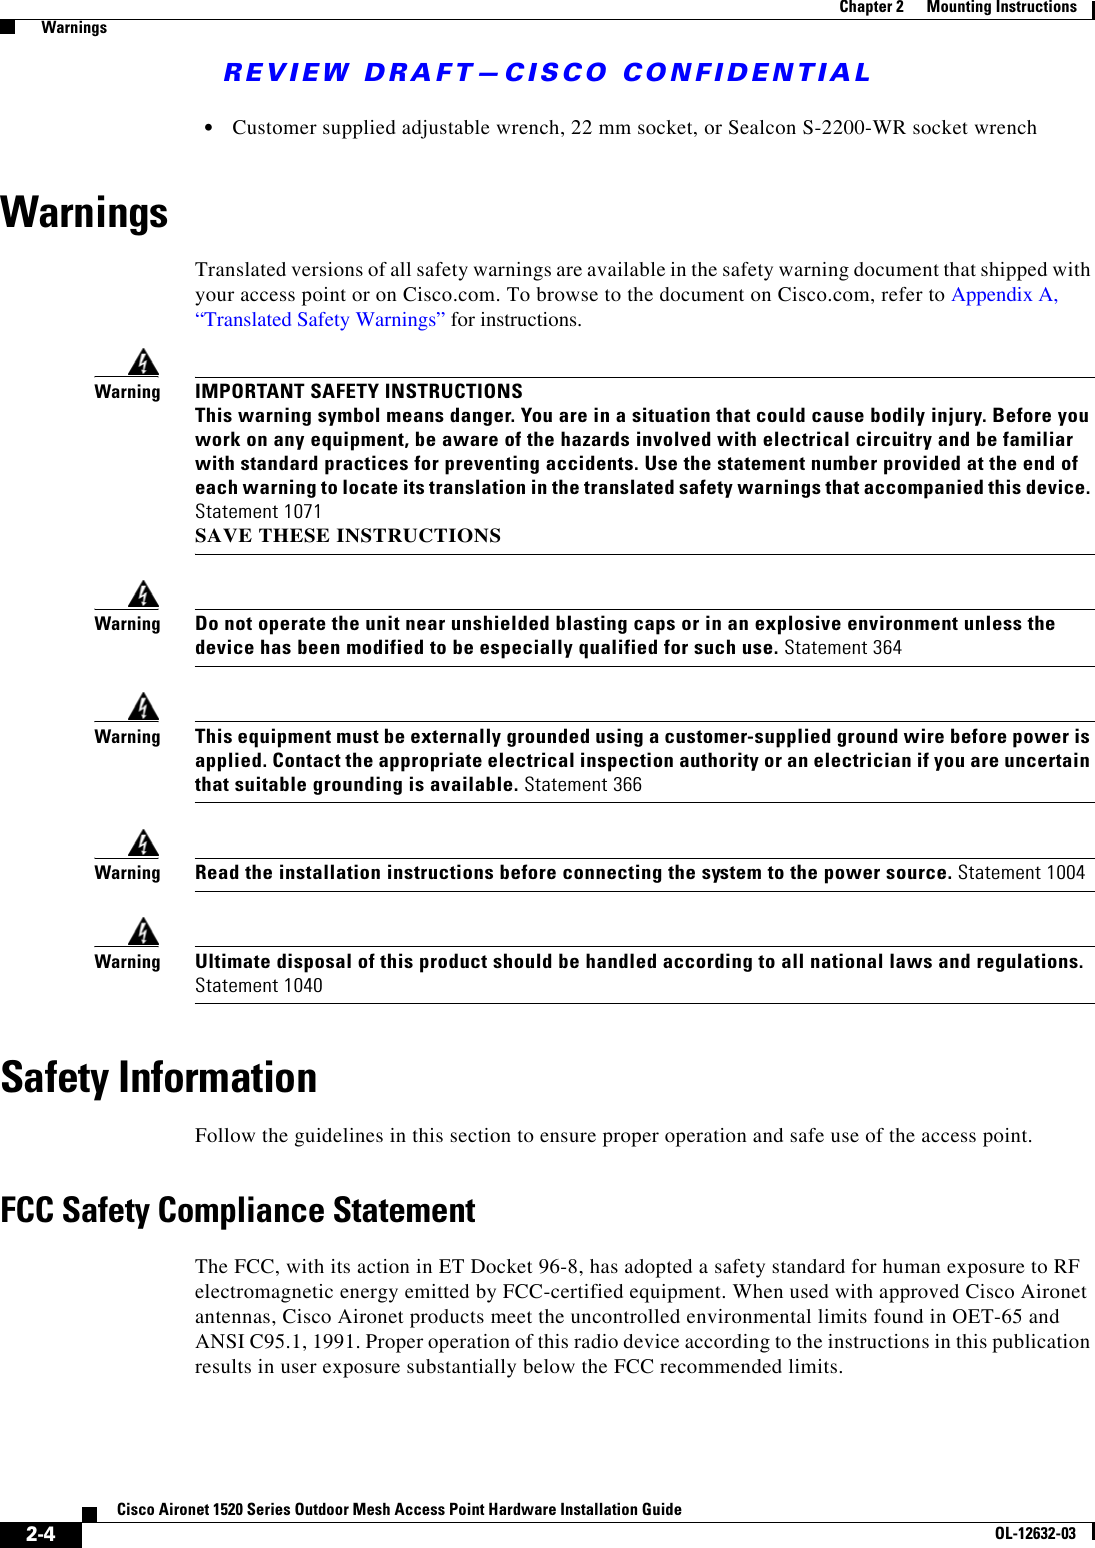 REVIEW DRAFT—CISCO CONFIDENTIAL2-4Cisco Aironet 1520 Series Outdoor Mesh Access Point Hardware Installation GuideOL-12632-03Chapter 2      Mounting Instructions  Warnings  • Customer supplied adjustable wrench, 22 mm socket, or Sealcon S-2200-WR socket wrench WarningsTranslated versions of all safety warnings are available in the safety warning document that shipped with your access point or on Cisco.com. To browse to the document on Cisco.com, refer to Appendix A, “Translated Safety Warnings” for instructions. WarningIMPORTANT SAFETY INSTRUCTIONS This warning symbol means danger. You are in a situation that could cause bodily injury. Before you work on any equipment, be aware of the hazards involved with electrical circuitry and be familiar with standard practices for preventing accidents. Use the statement number provided at the end of each warning to locate its translation in the translated safety warnings that accompanied this device. Statement 1071 SAVE THESE INSTRUCTIONSWarningDo not operate the unit near unshielded blasting caps or in an explosive environment unless the device has been modified to be especially qualified for such use. Statement 364WarningThis equipment must be externally grounded using a customer-supplied ground wire before power is applied. Contact the appropriate electrical inspection authority or an electrician if you are uncertain that suitable grounding is available. Statement 366WarningRead the installation instructions before connecting the system to the power source. Statement 1004WarningUltimate disposal of this product should be handled according to all national laws and regulations. Statement 1040Safety InformationFollow the guidelines in this section to ensure proper operation and safe use of the access point.FCC Safety Compliance StatementThe FCC, with its action in ET Docket 96-8, has adopted a safety standard for human exposure to RF electromagnetic energy emitted by FCC-certified equipment. When used with approved Cisco Aironet antennas, Cisco Aironet products meet the uncontrolled environmental limits found in OET-65 and ANSI C95.1, 1991. Proper operation of this radio device according to the instructions in this publication results in user exposure substantially below the FCC recommended limits.